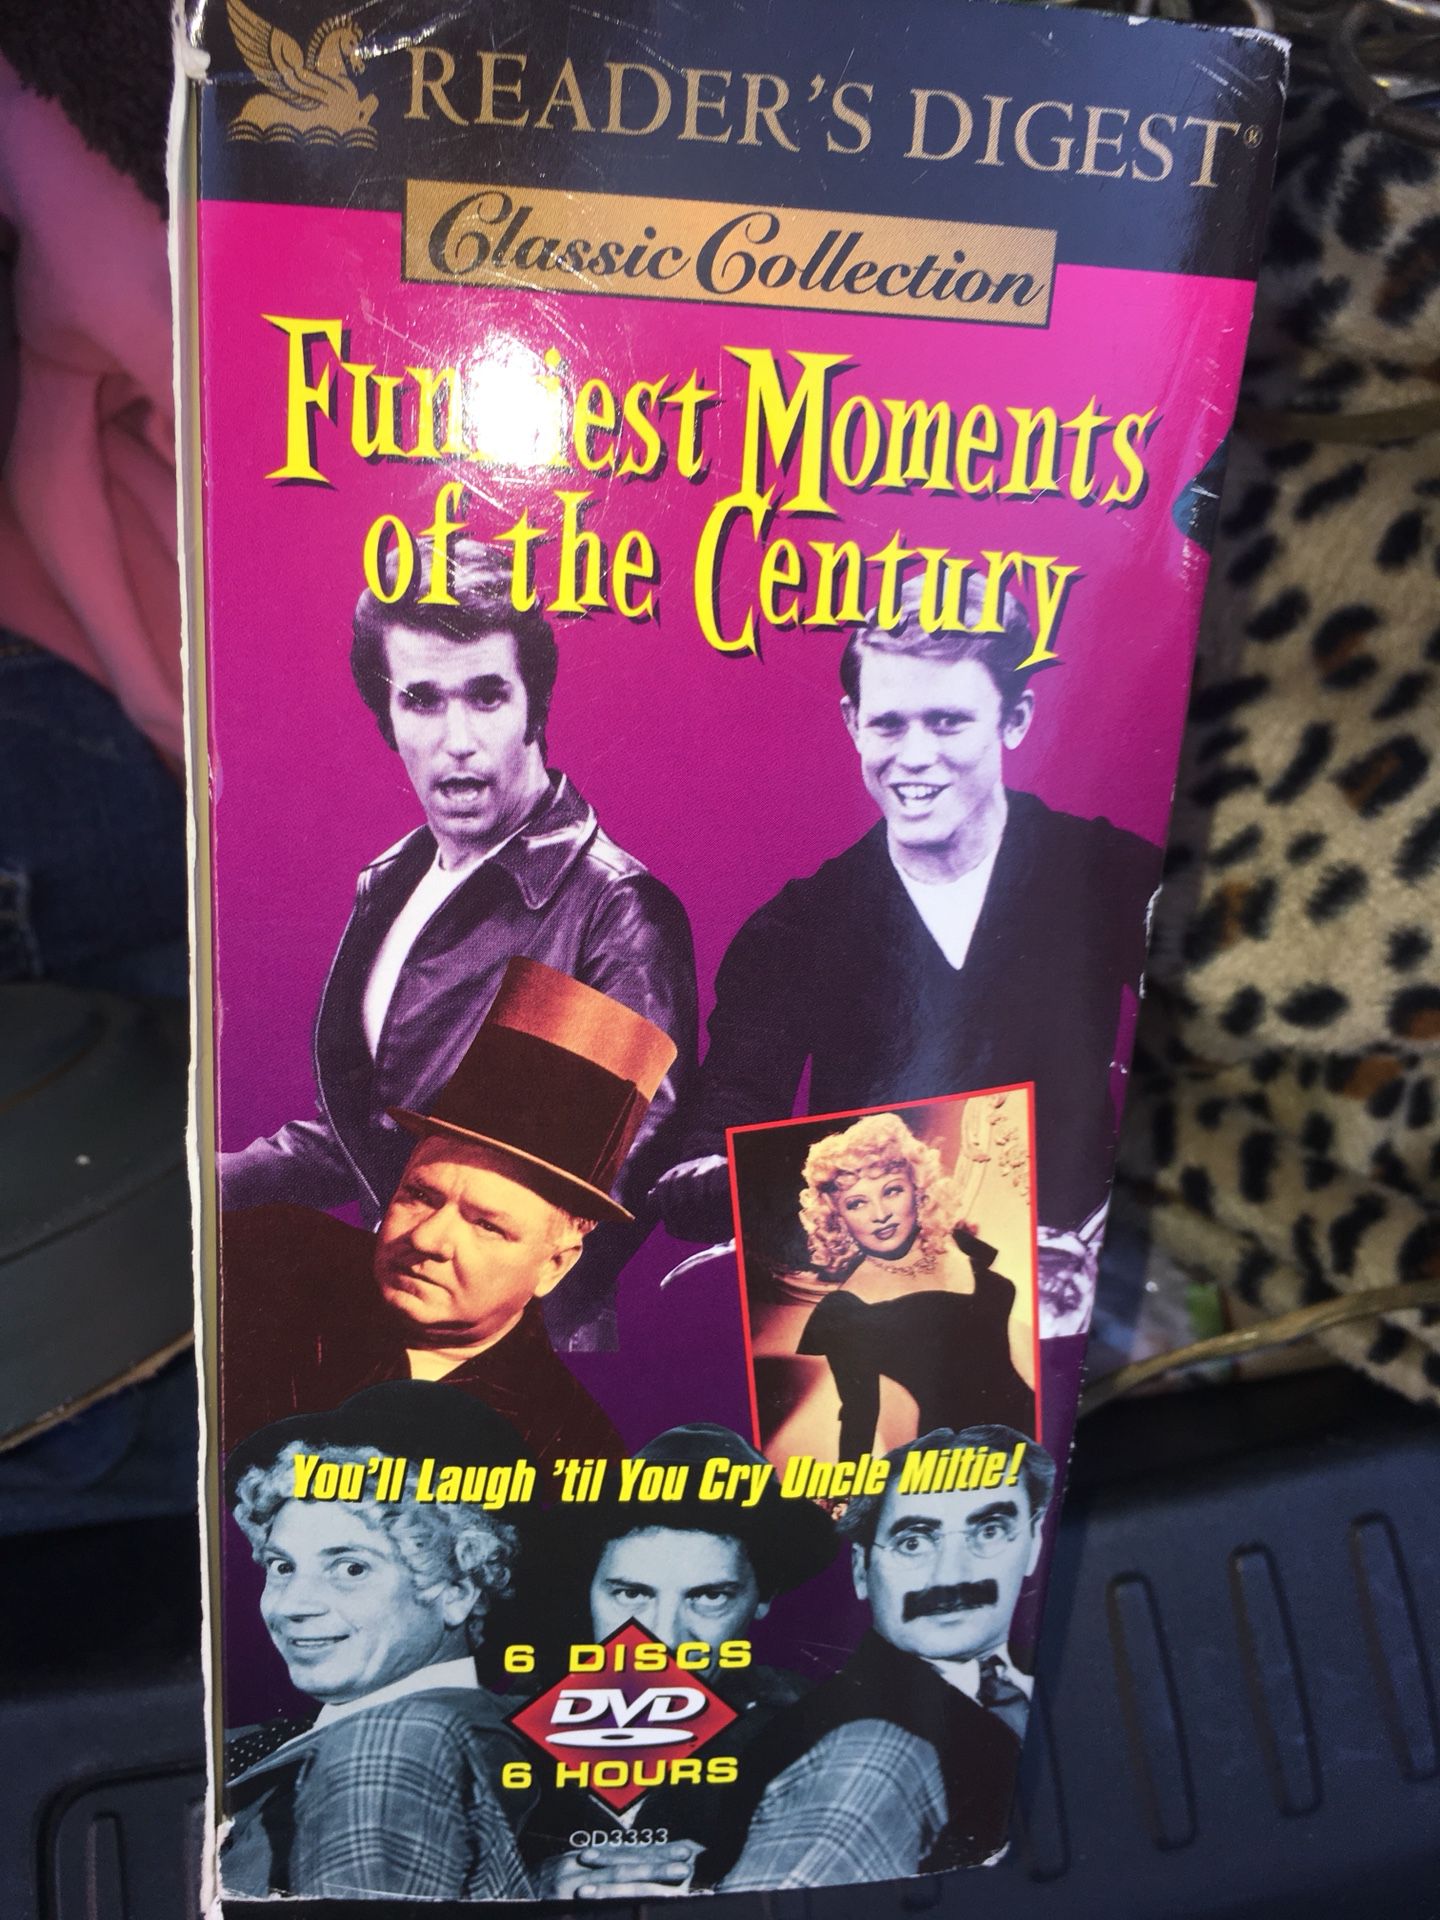 Vintage Collection of Funniest Moments DVD's